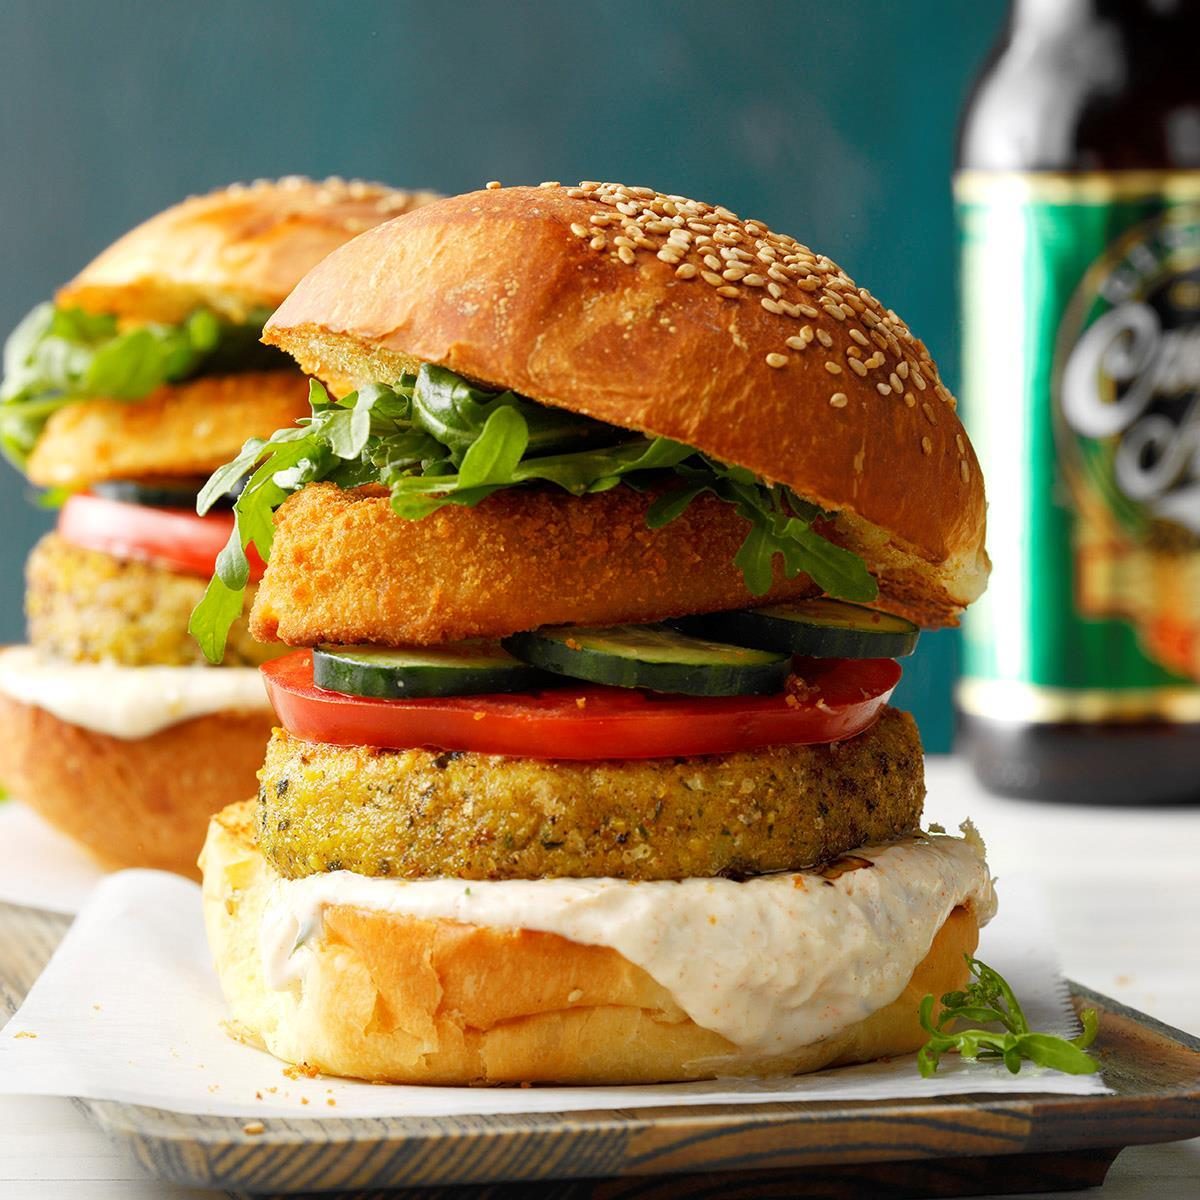 30 Fun Burger Toppings and Ideas - Insanely Good